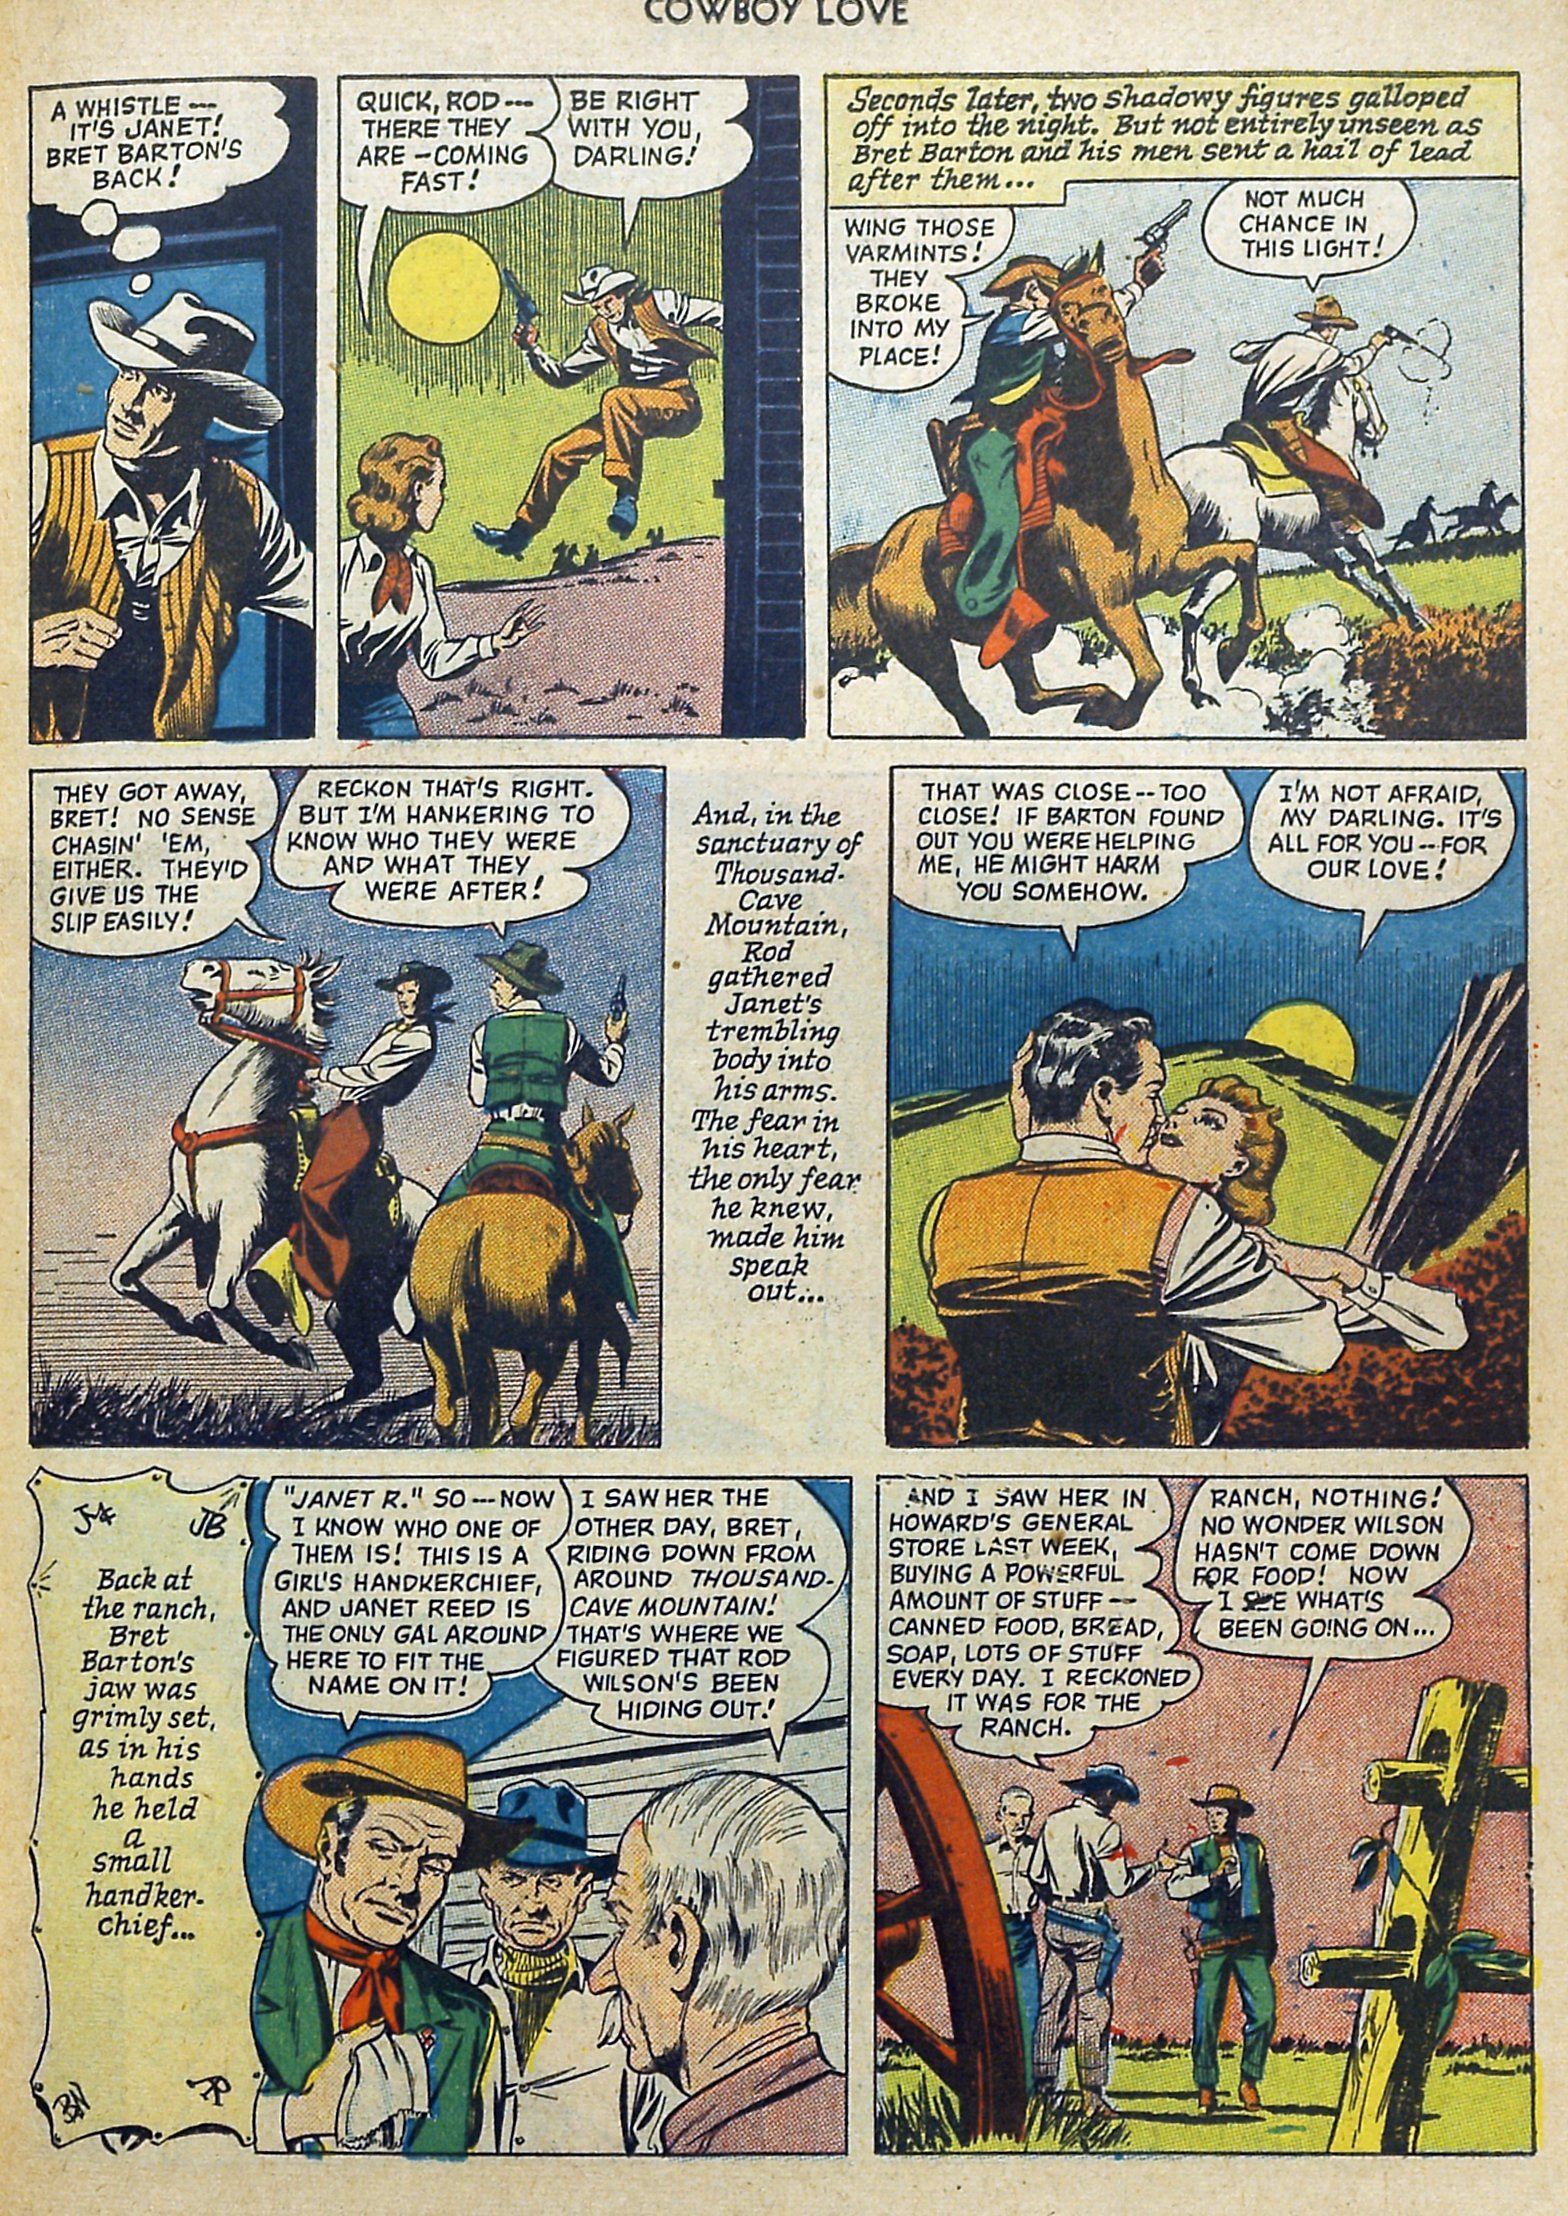 Read online Cowboy Love comic -  Issue #9 - 35